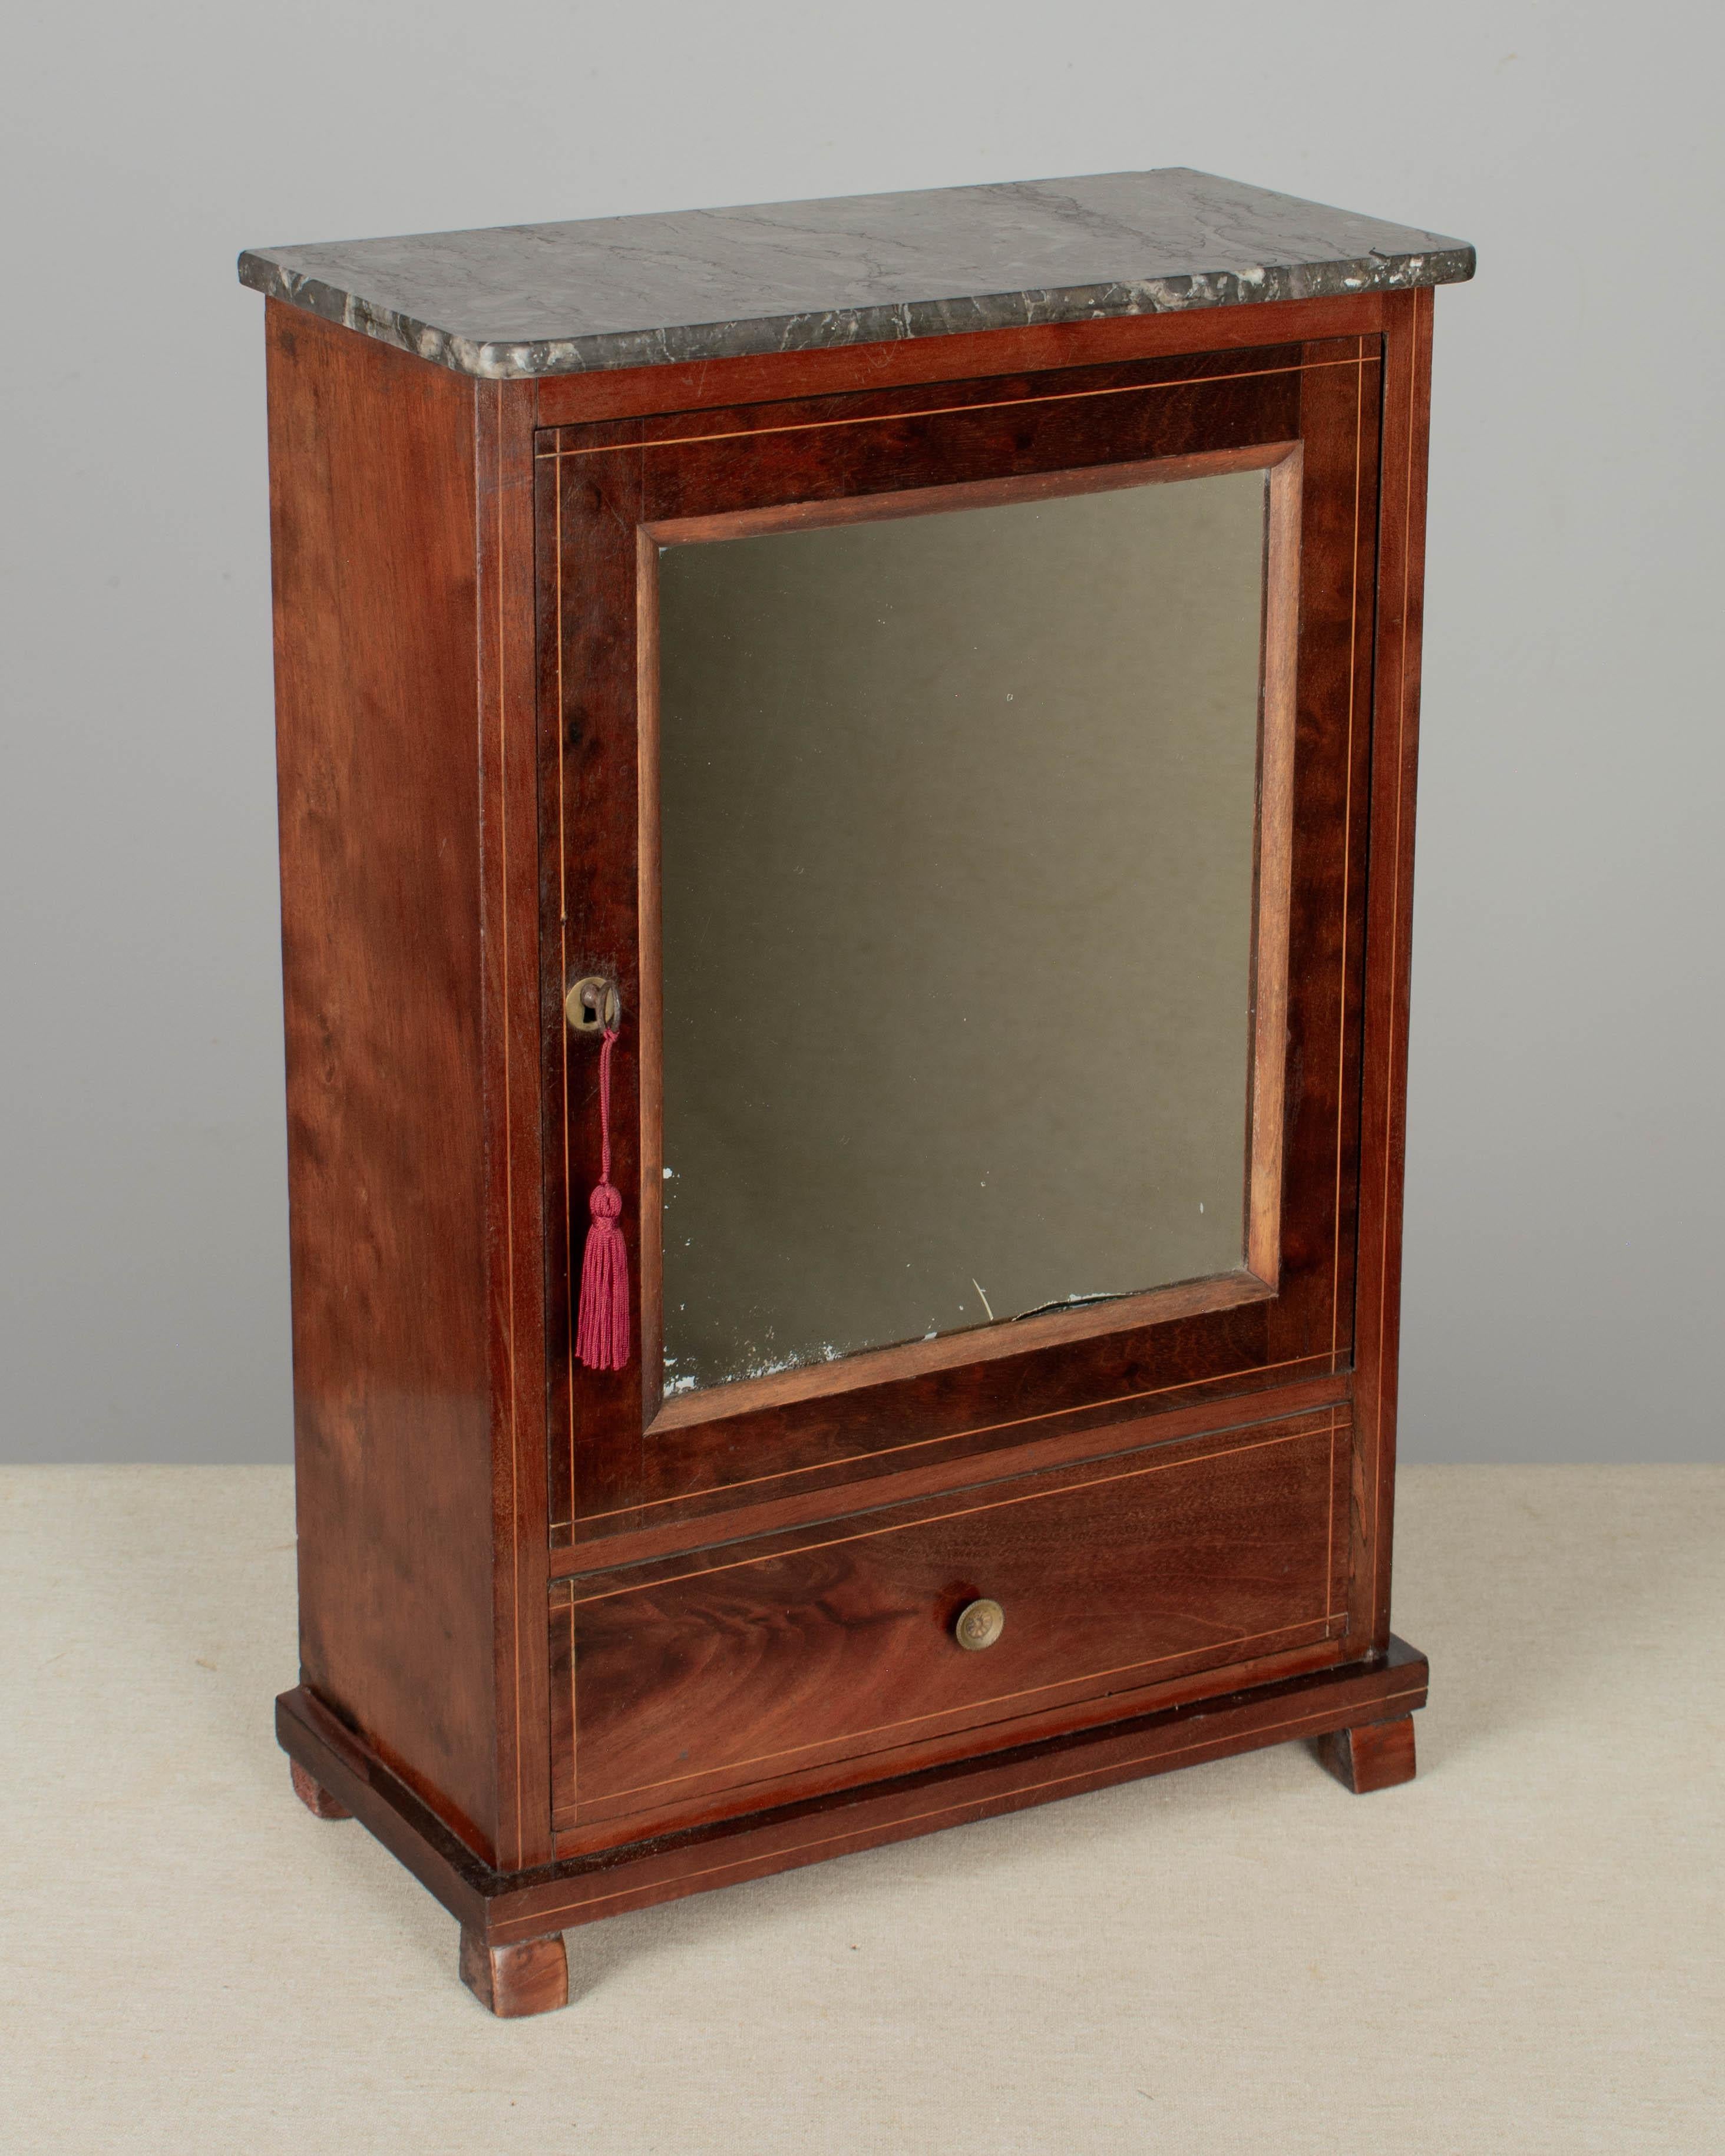 An early 20th Century French Louis Philippe style miniature doll armoire. Mahogany veneer with inlay detail and pine as a secondary wood. Mirrored door with drawer below. St. Anne grey marble top. All original. Lock and key are present, but not